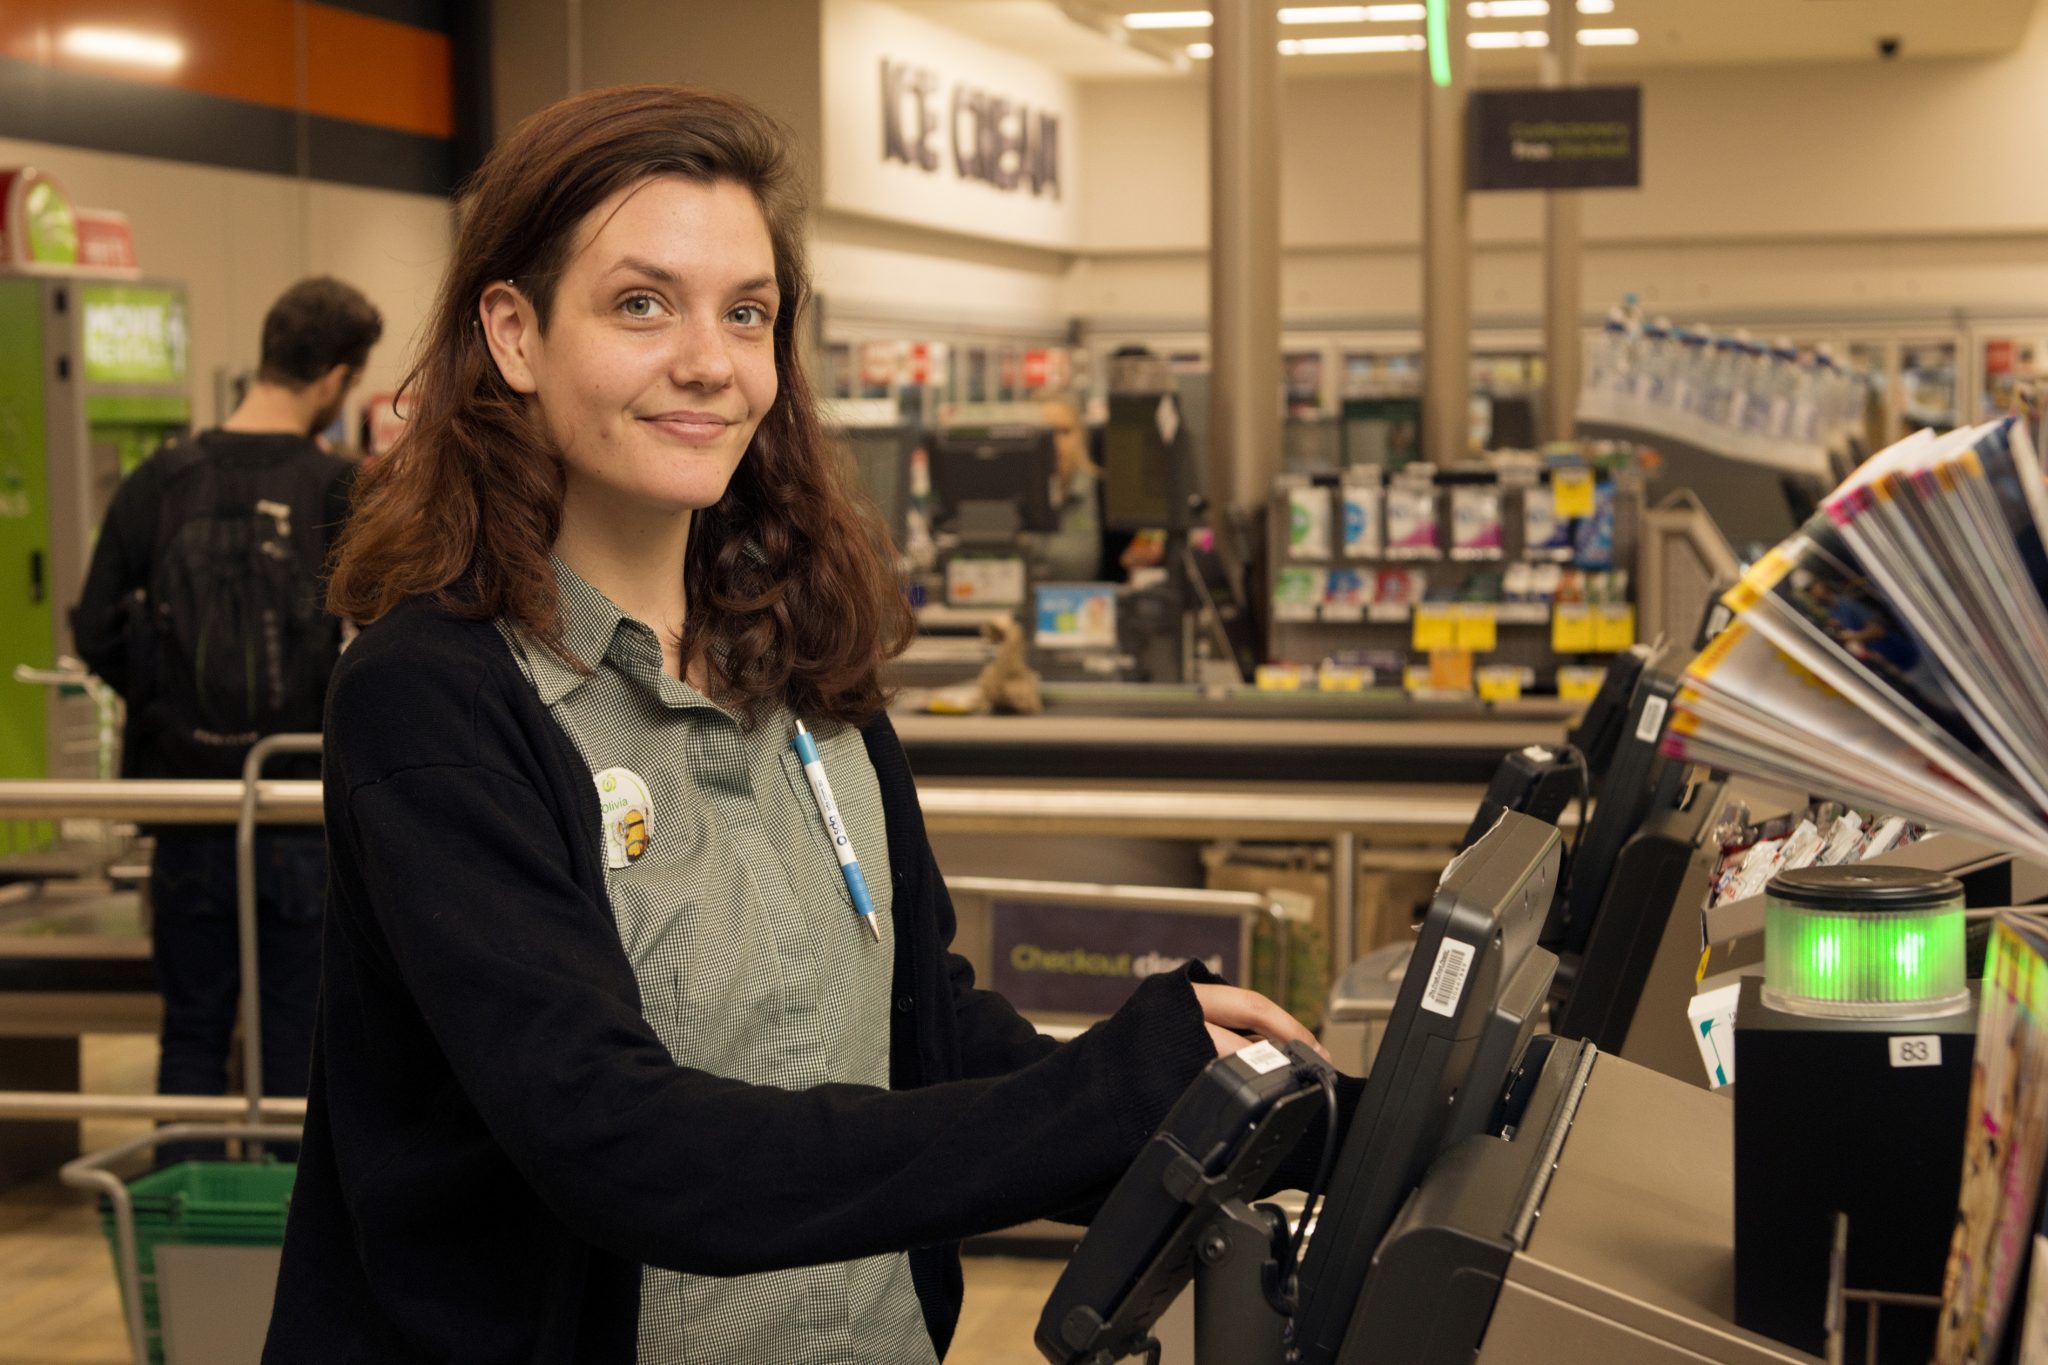 Work in retail: over 70,000 jobs for assistants, warehouse operators, cashiers and more